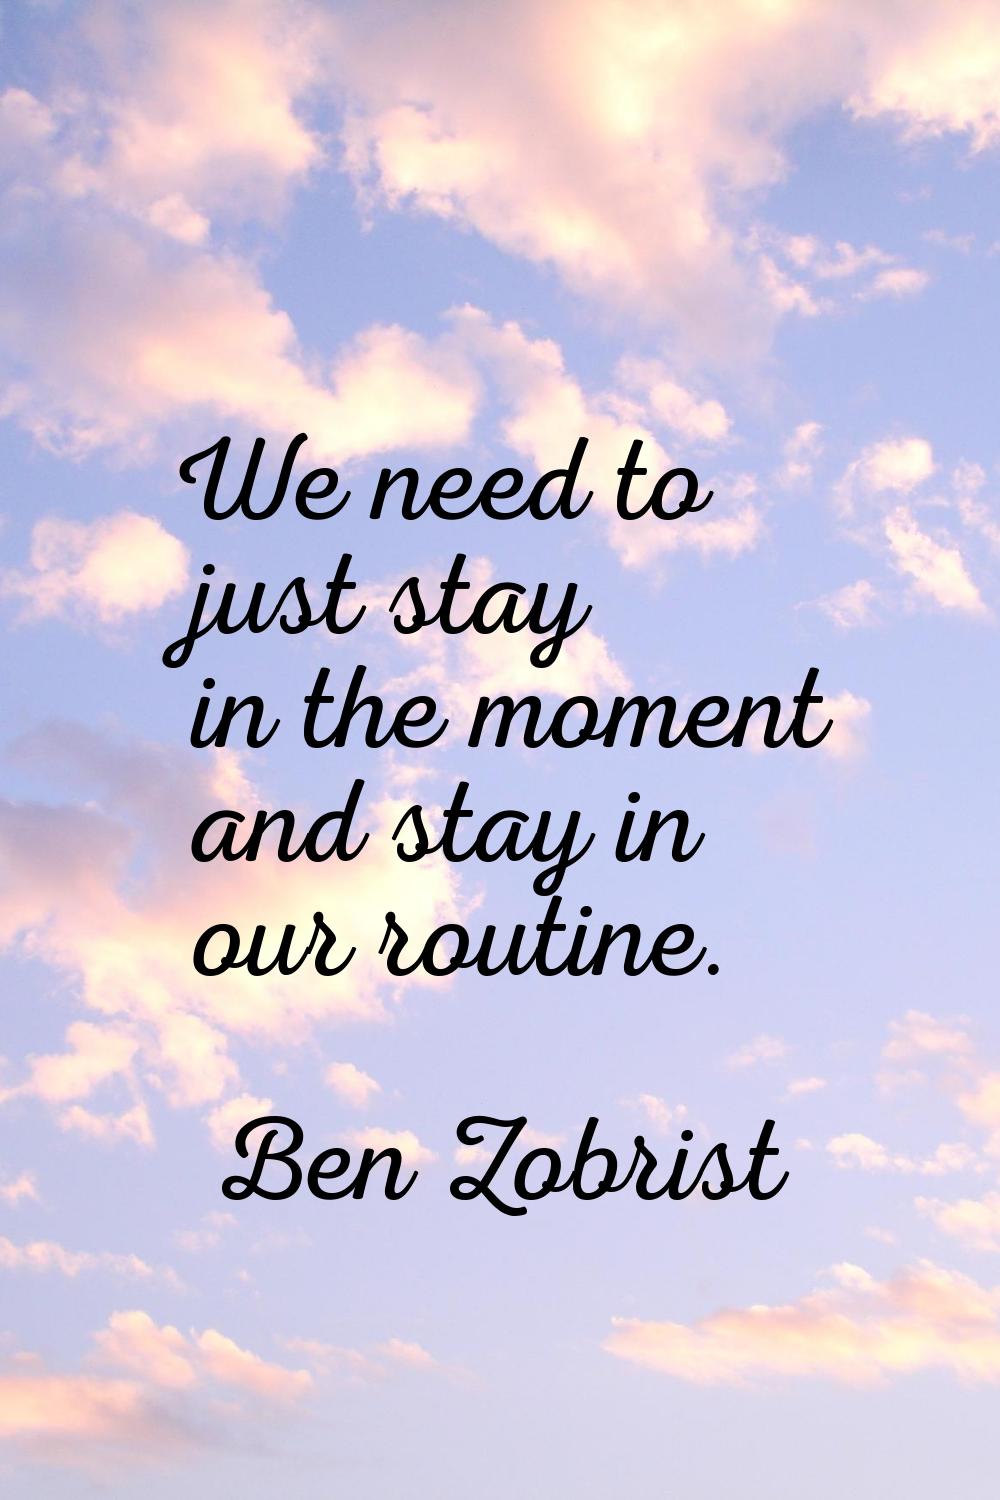 We need to just stay in the moment and stay in our routine.